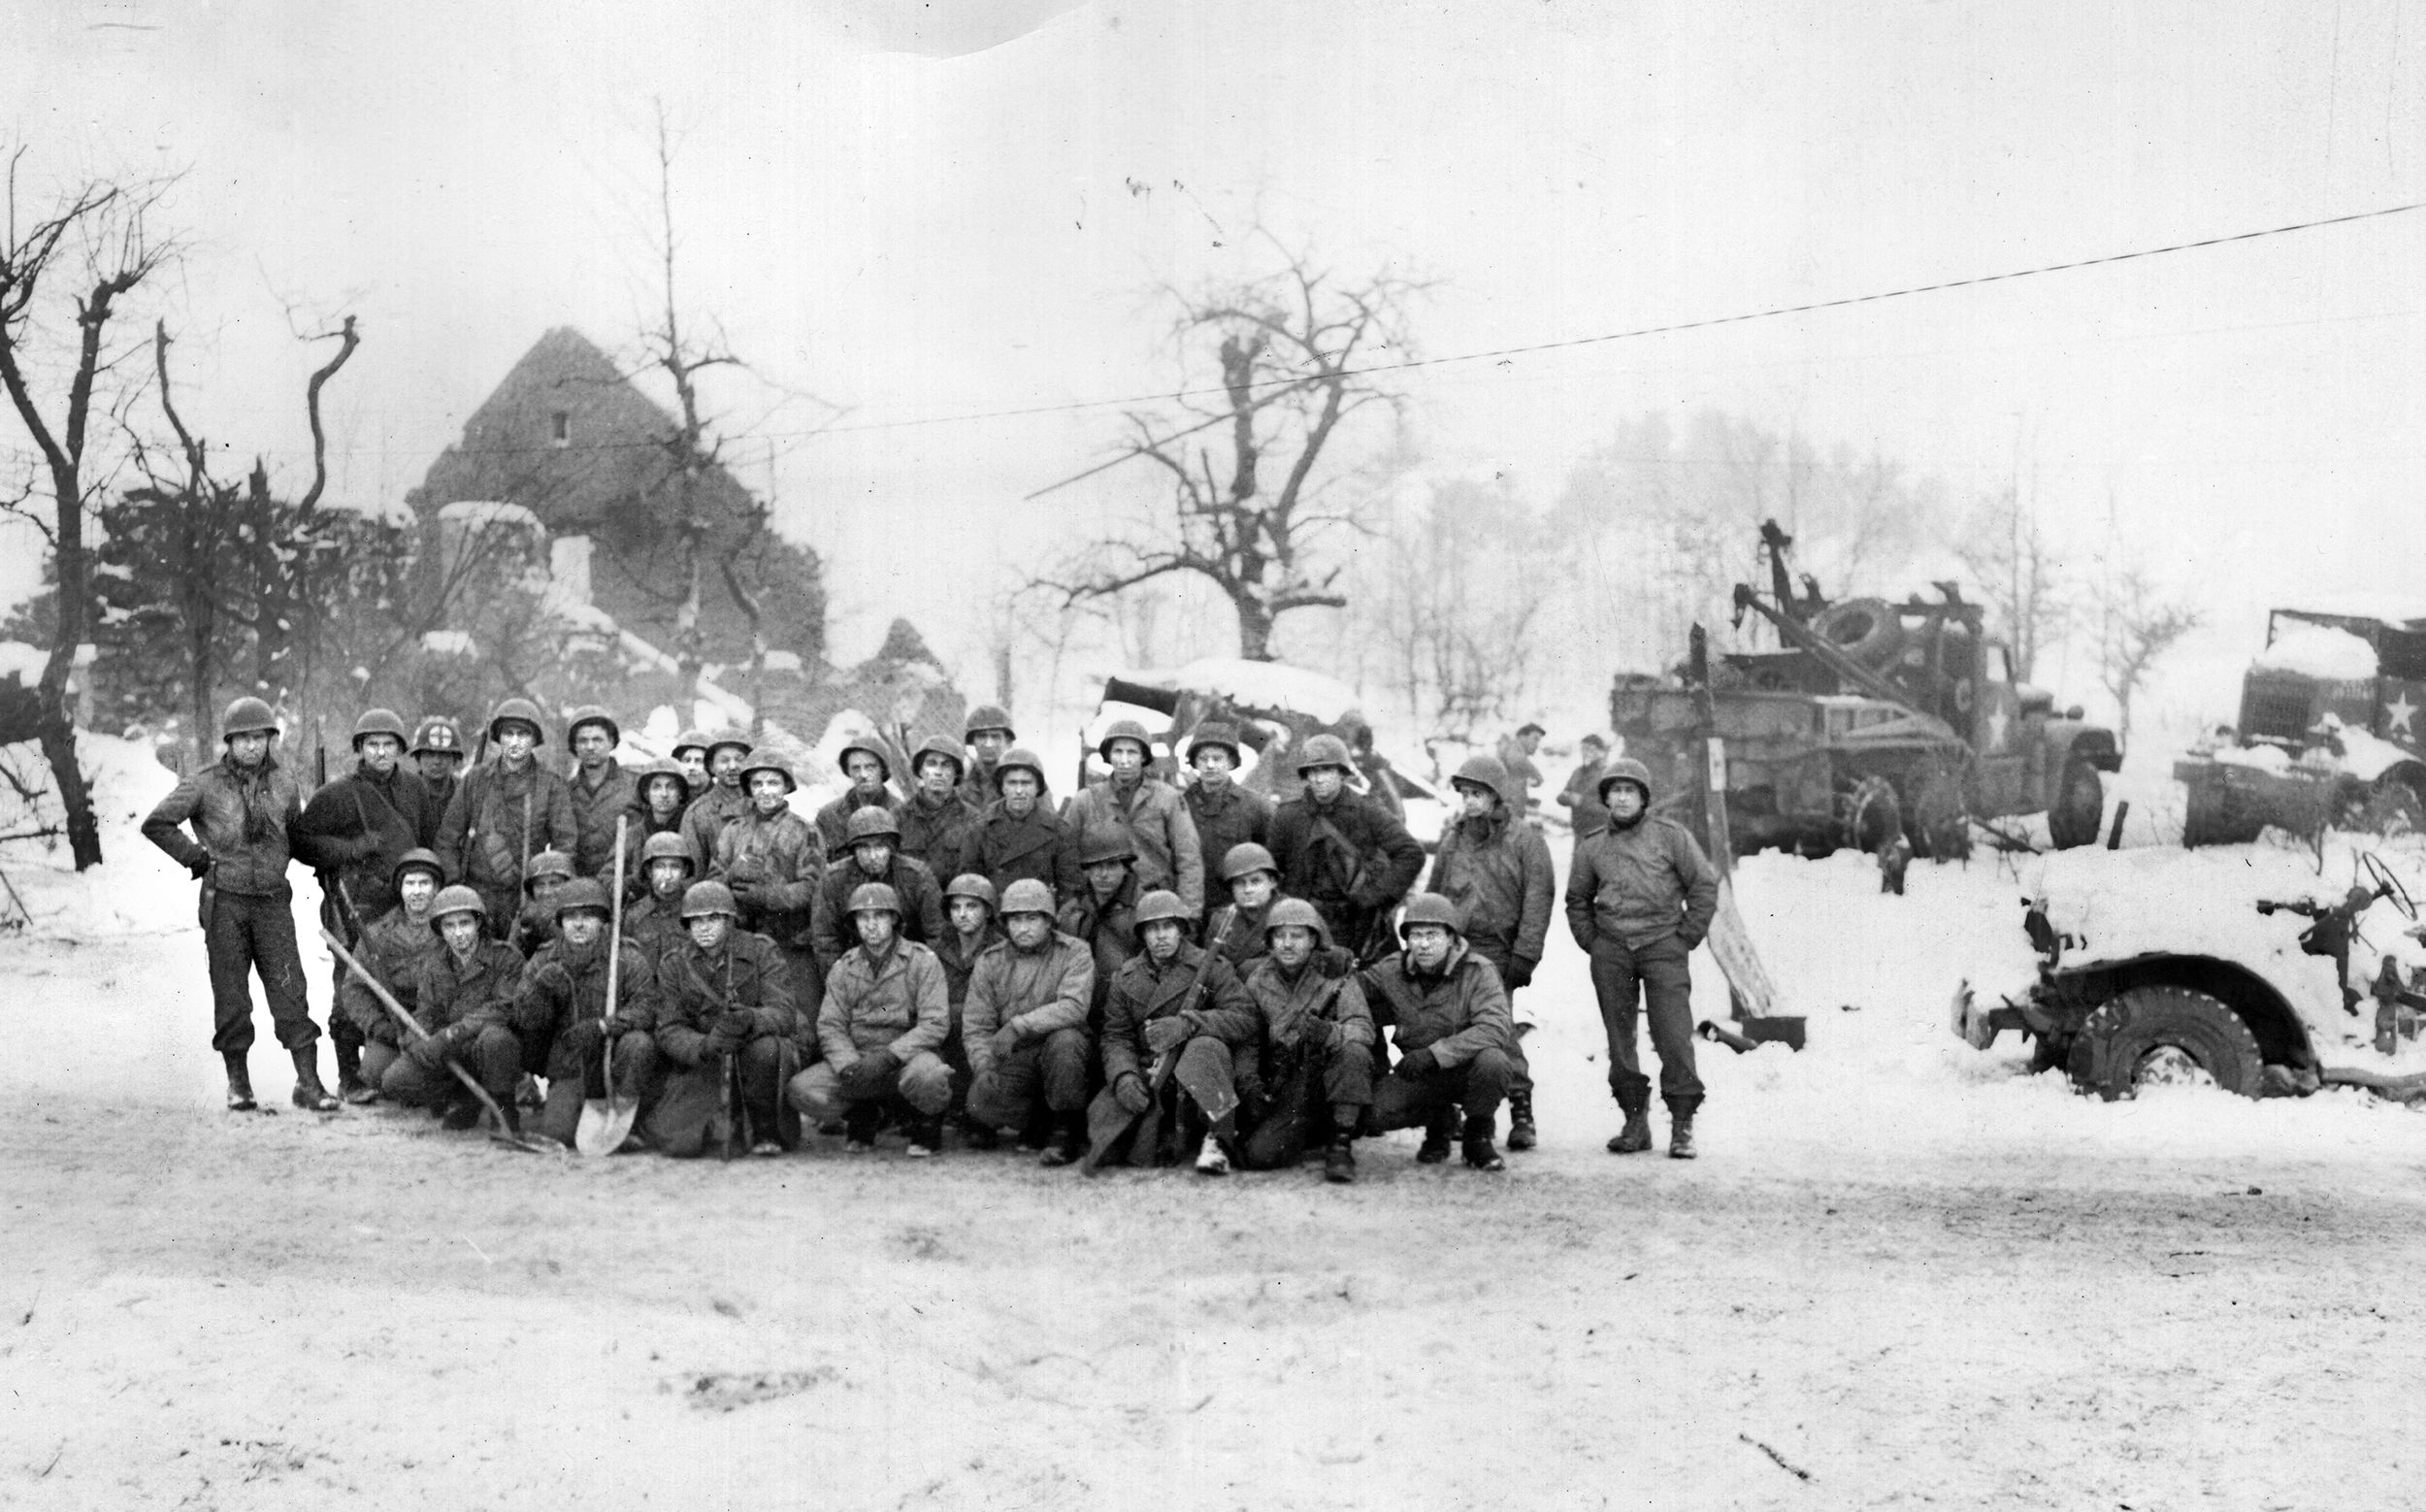 Elements of Lieutenant Colonel David E. Pergrin’s 291st Engineer Combat Battalion were located in Malmedy when Kampfgruppe Peiper passed through and massacred 84 American prisoners of war at the nearby Baugnez crossroads.  Among the first Americans to discover evidence of the war crime were engineers of C Company pictured in this photo.